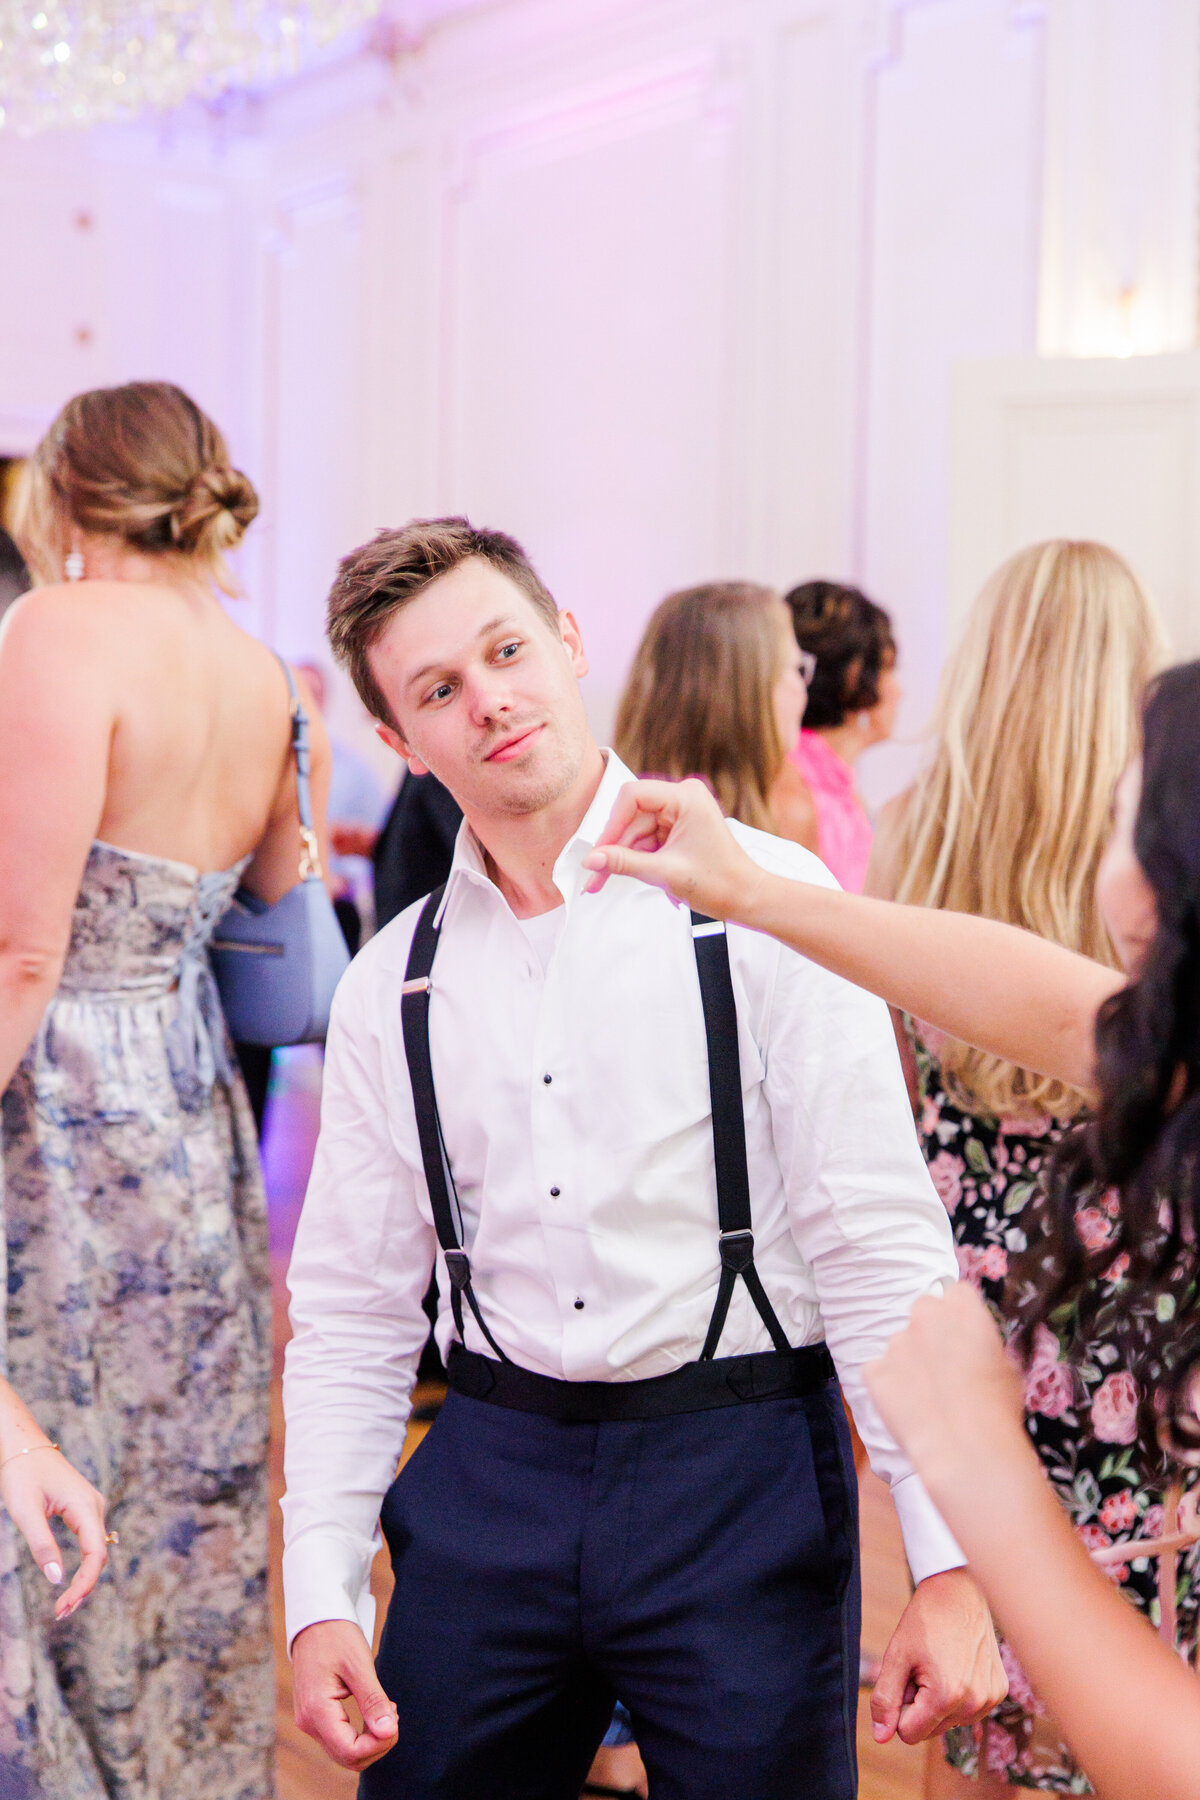 Groom dancing during his wedding reception representing candid and joyful Boston wedding pictures